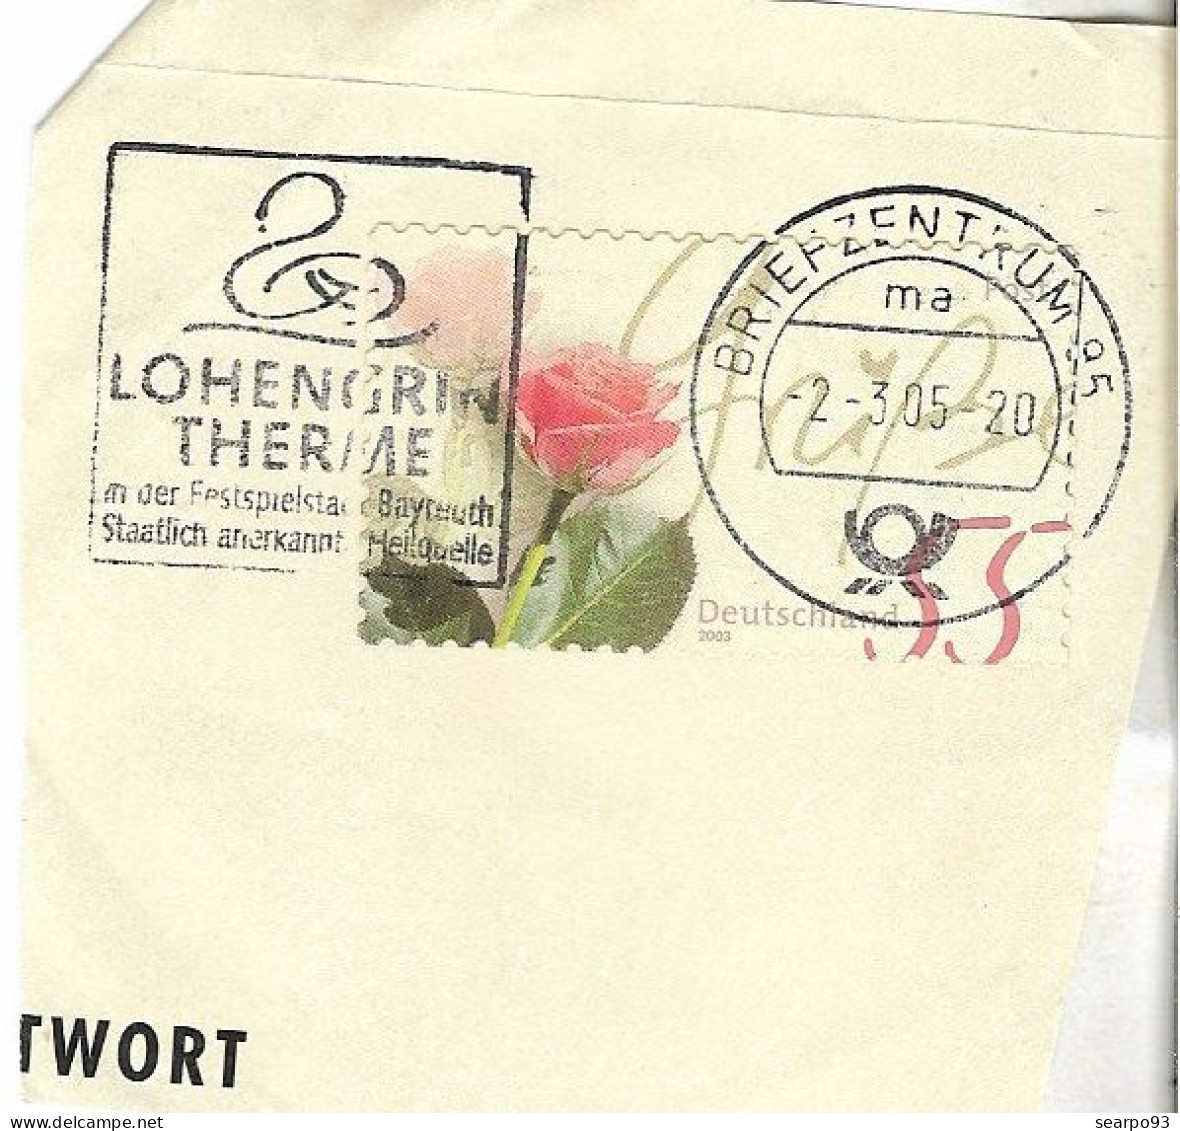 GERMANY. POSTMARK LOHENGRIN THERME. 2005 - Covers & Documents